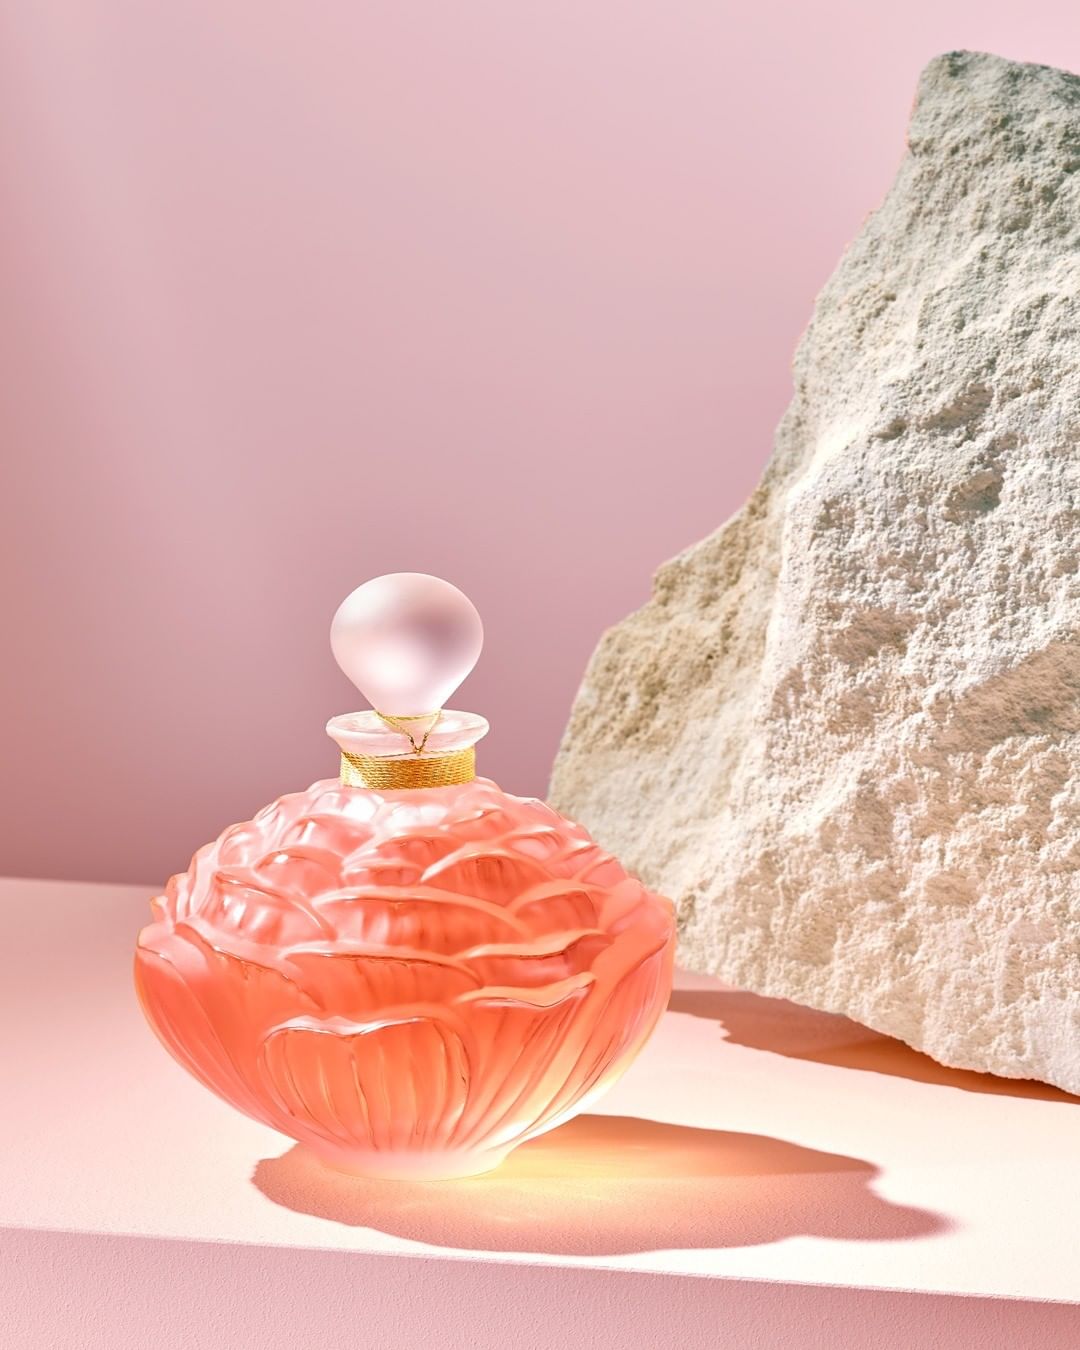 LALIQUE - A truly impressive piece of crystal-making, “Pivoine” magnifies both the strength and grace of the flower. The edges and fine veins of each petal, in transparent crystal, enhance the refined...